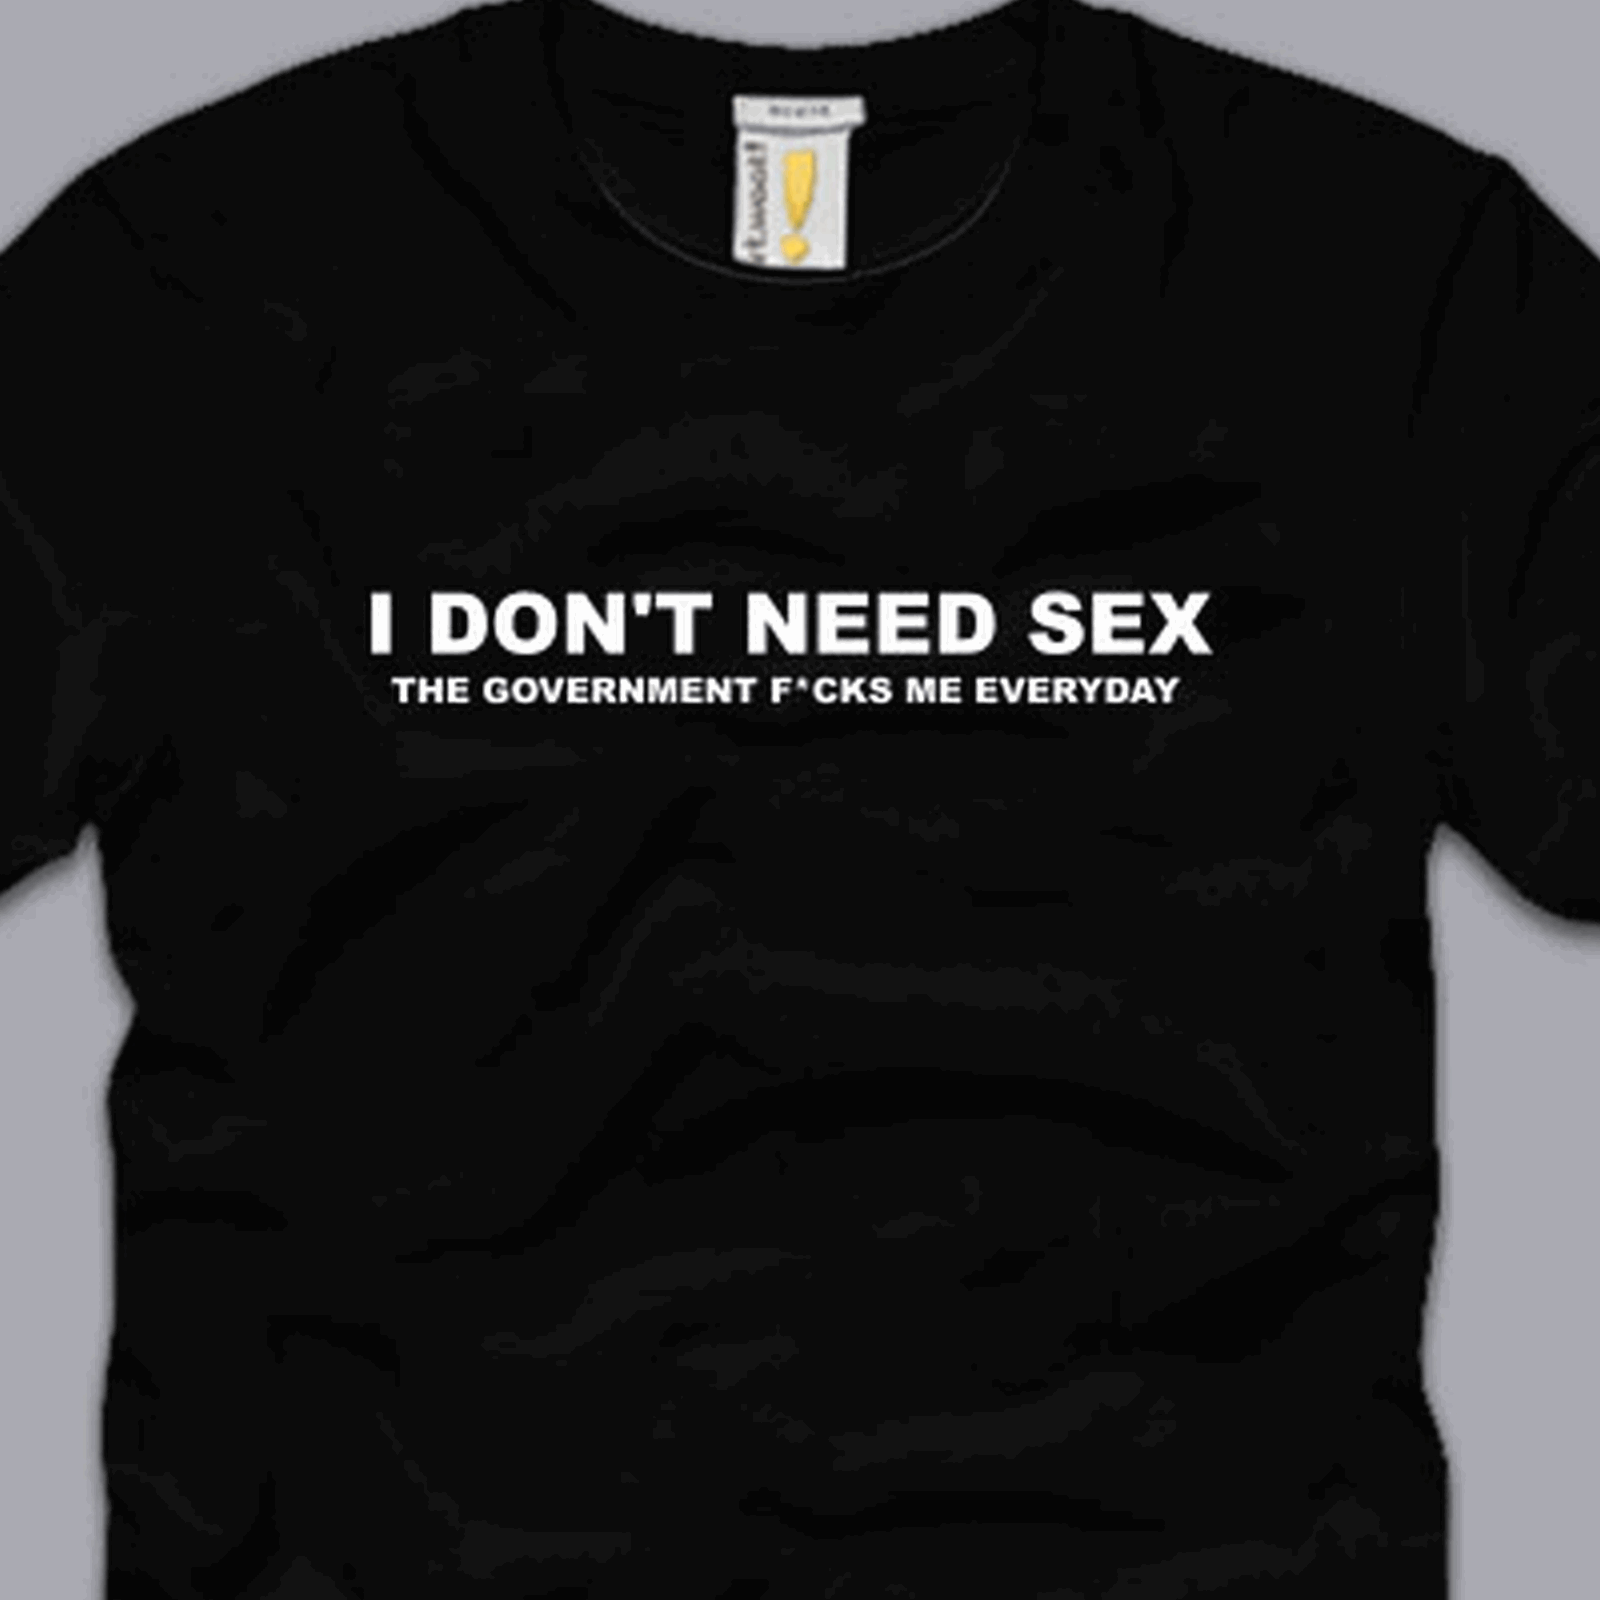 I Dont Need Sex T Shirt S M L Xl 2xl 3xl Funny Anti Government Taxes Cool Tee Ebay